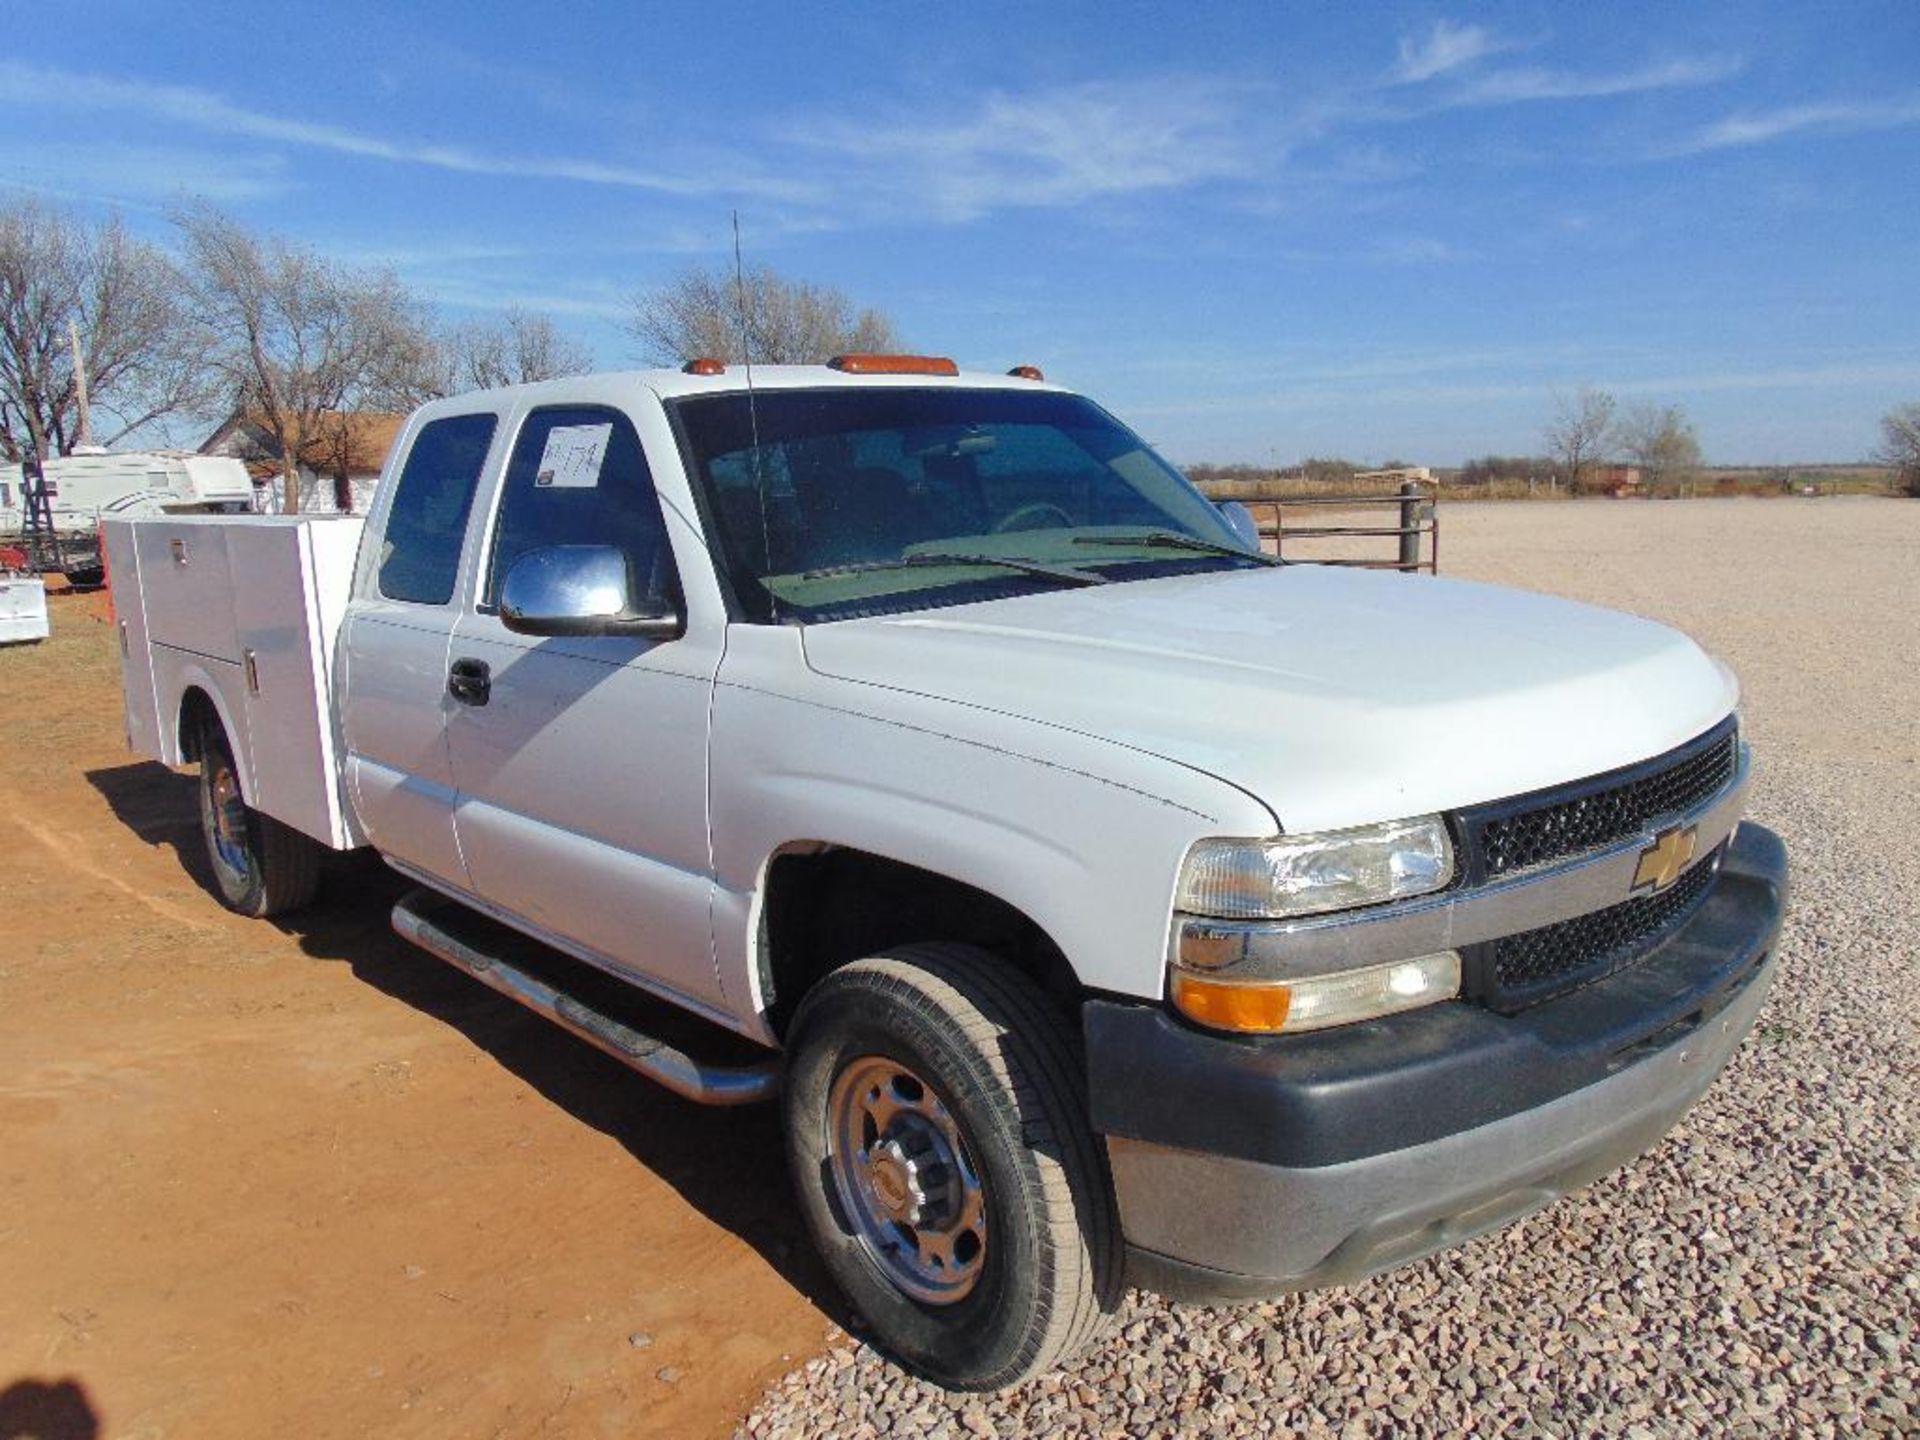 2001 Chevy 2500 Pickup, s/n 1gchc29u91e227056, v8 eng, auto trans, utility bed, od reads 340252 - Image 2 of 10